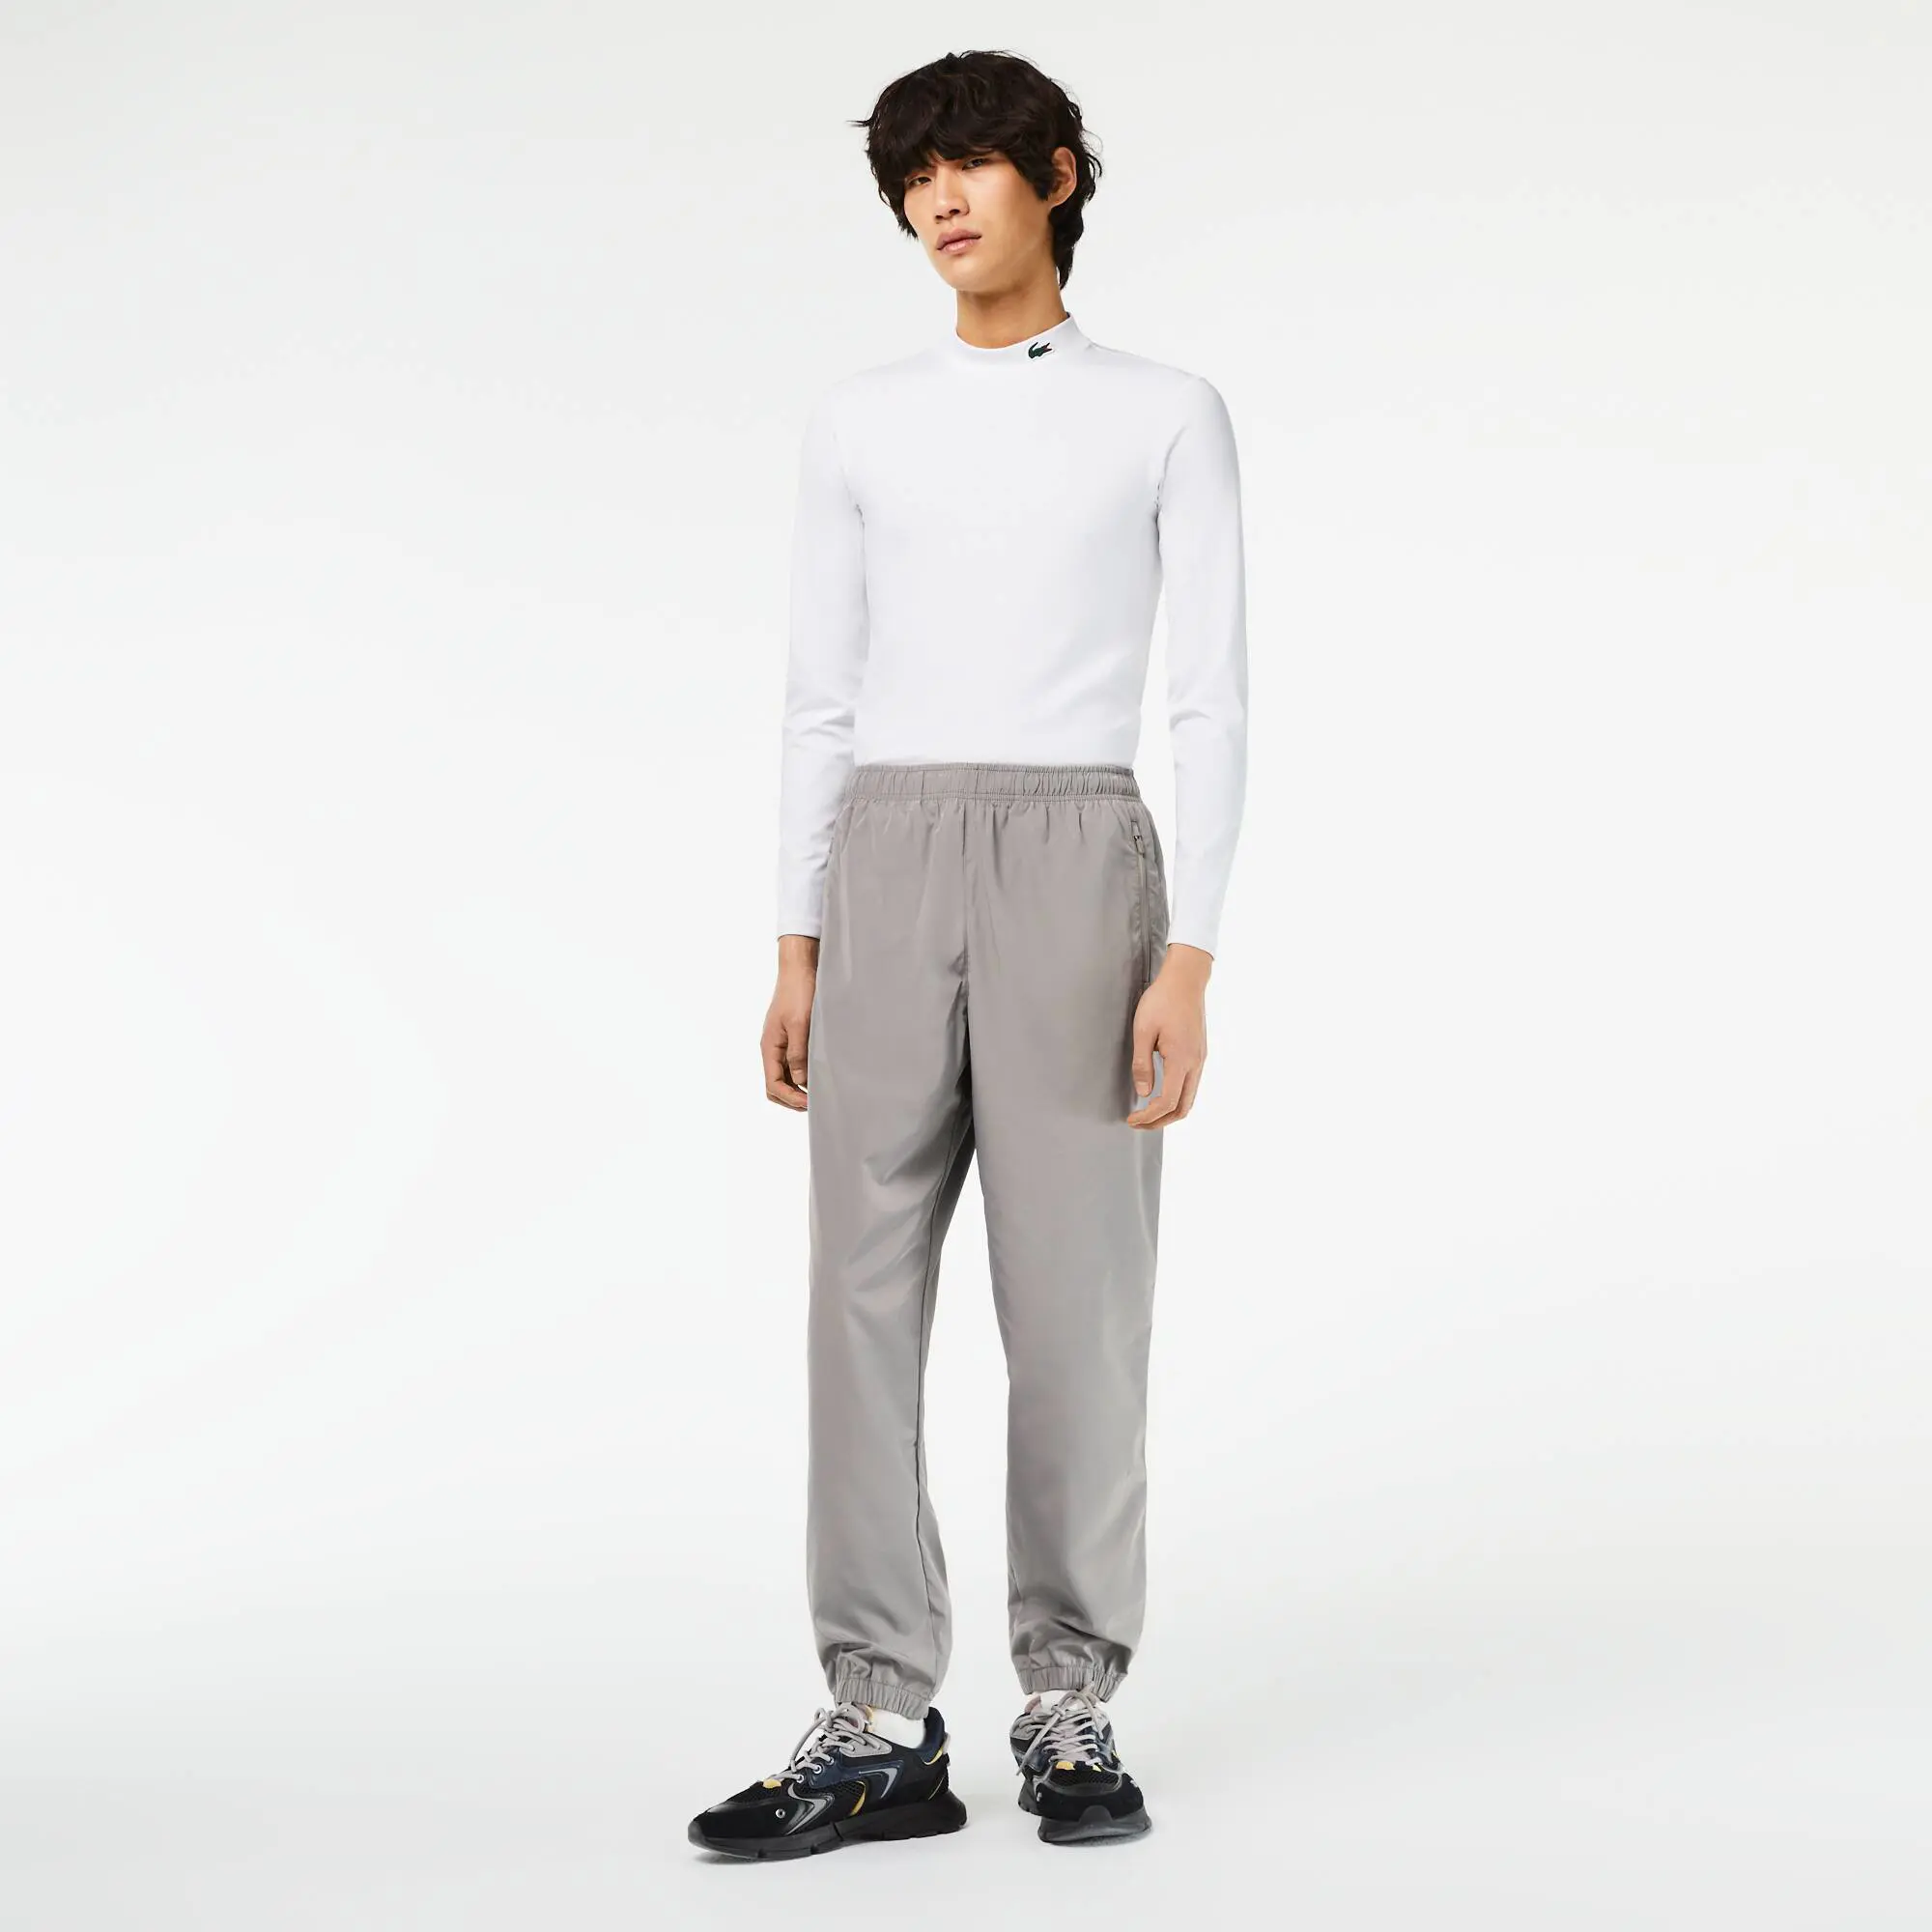 Lacoste Men’s Lacoste Track Pants with GPS Coordinates. 1